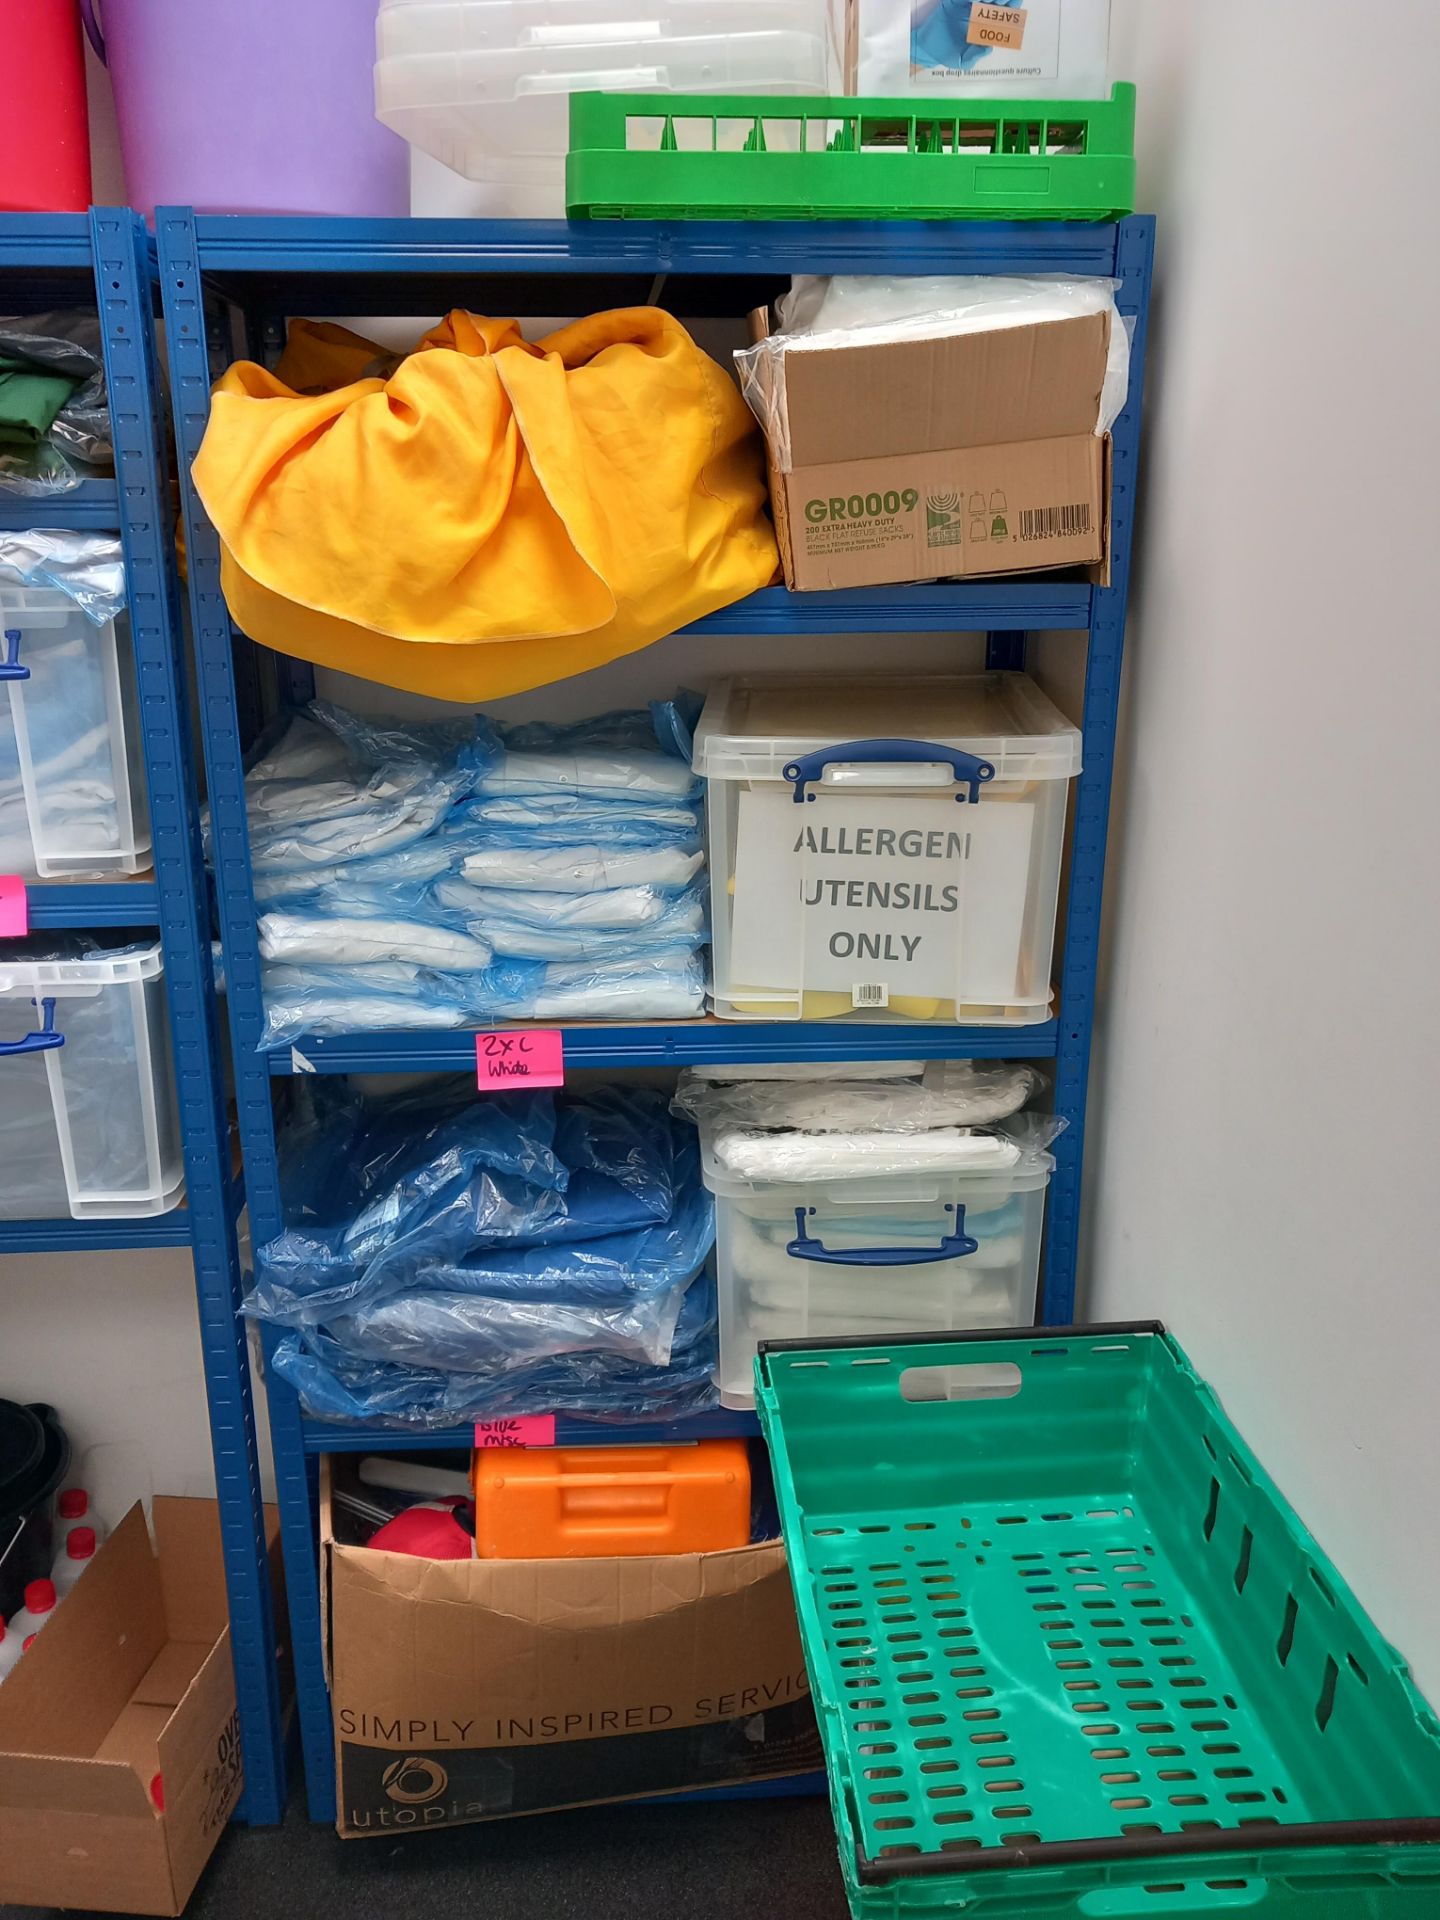 Contents to cleaning store room to include vacuum, aprons, hair nets, buckets, wipes, cloths etc. - Image 2 of 4